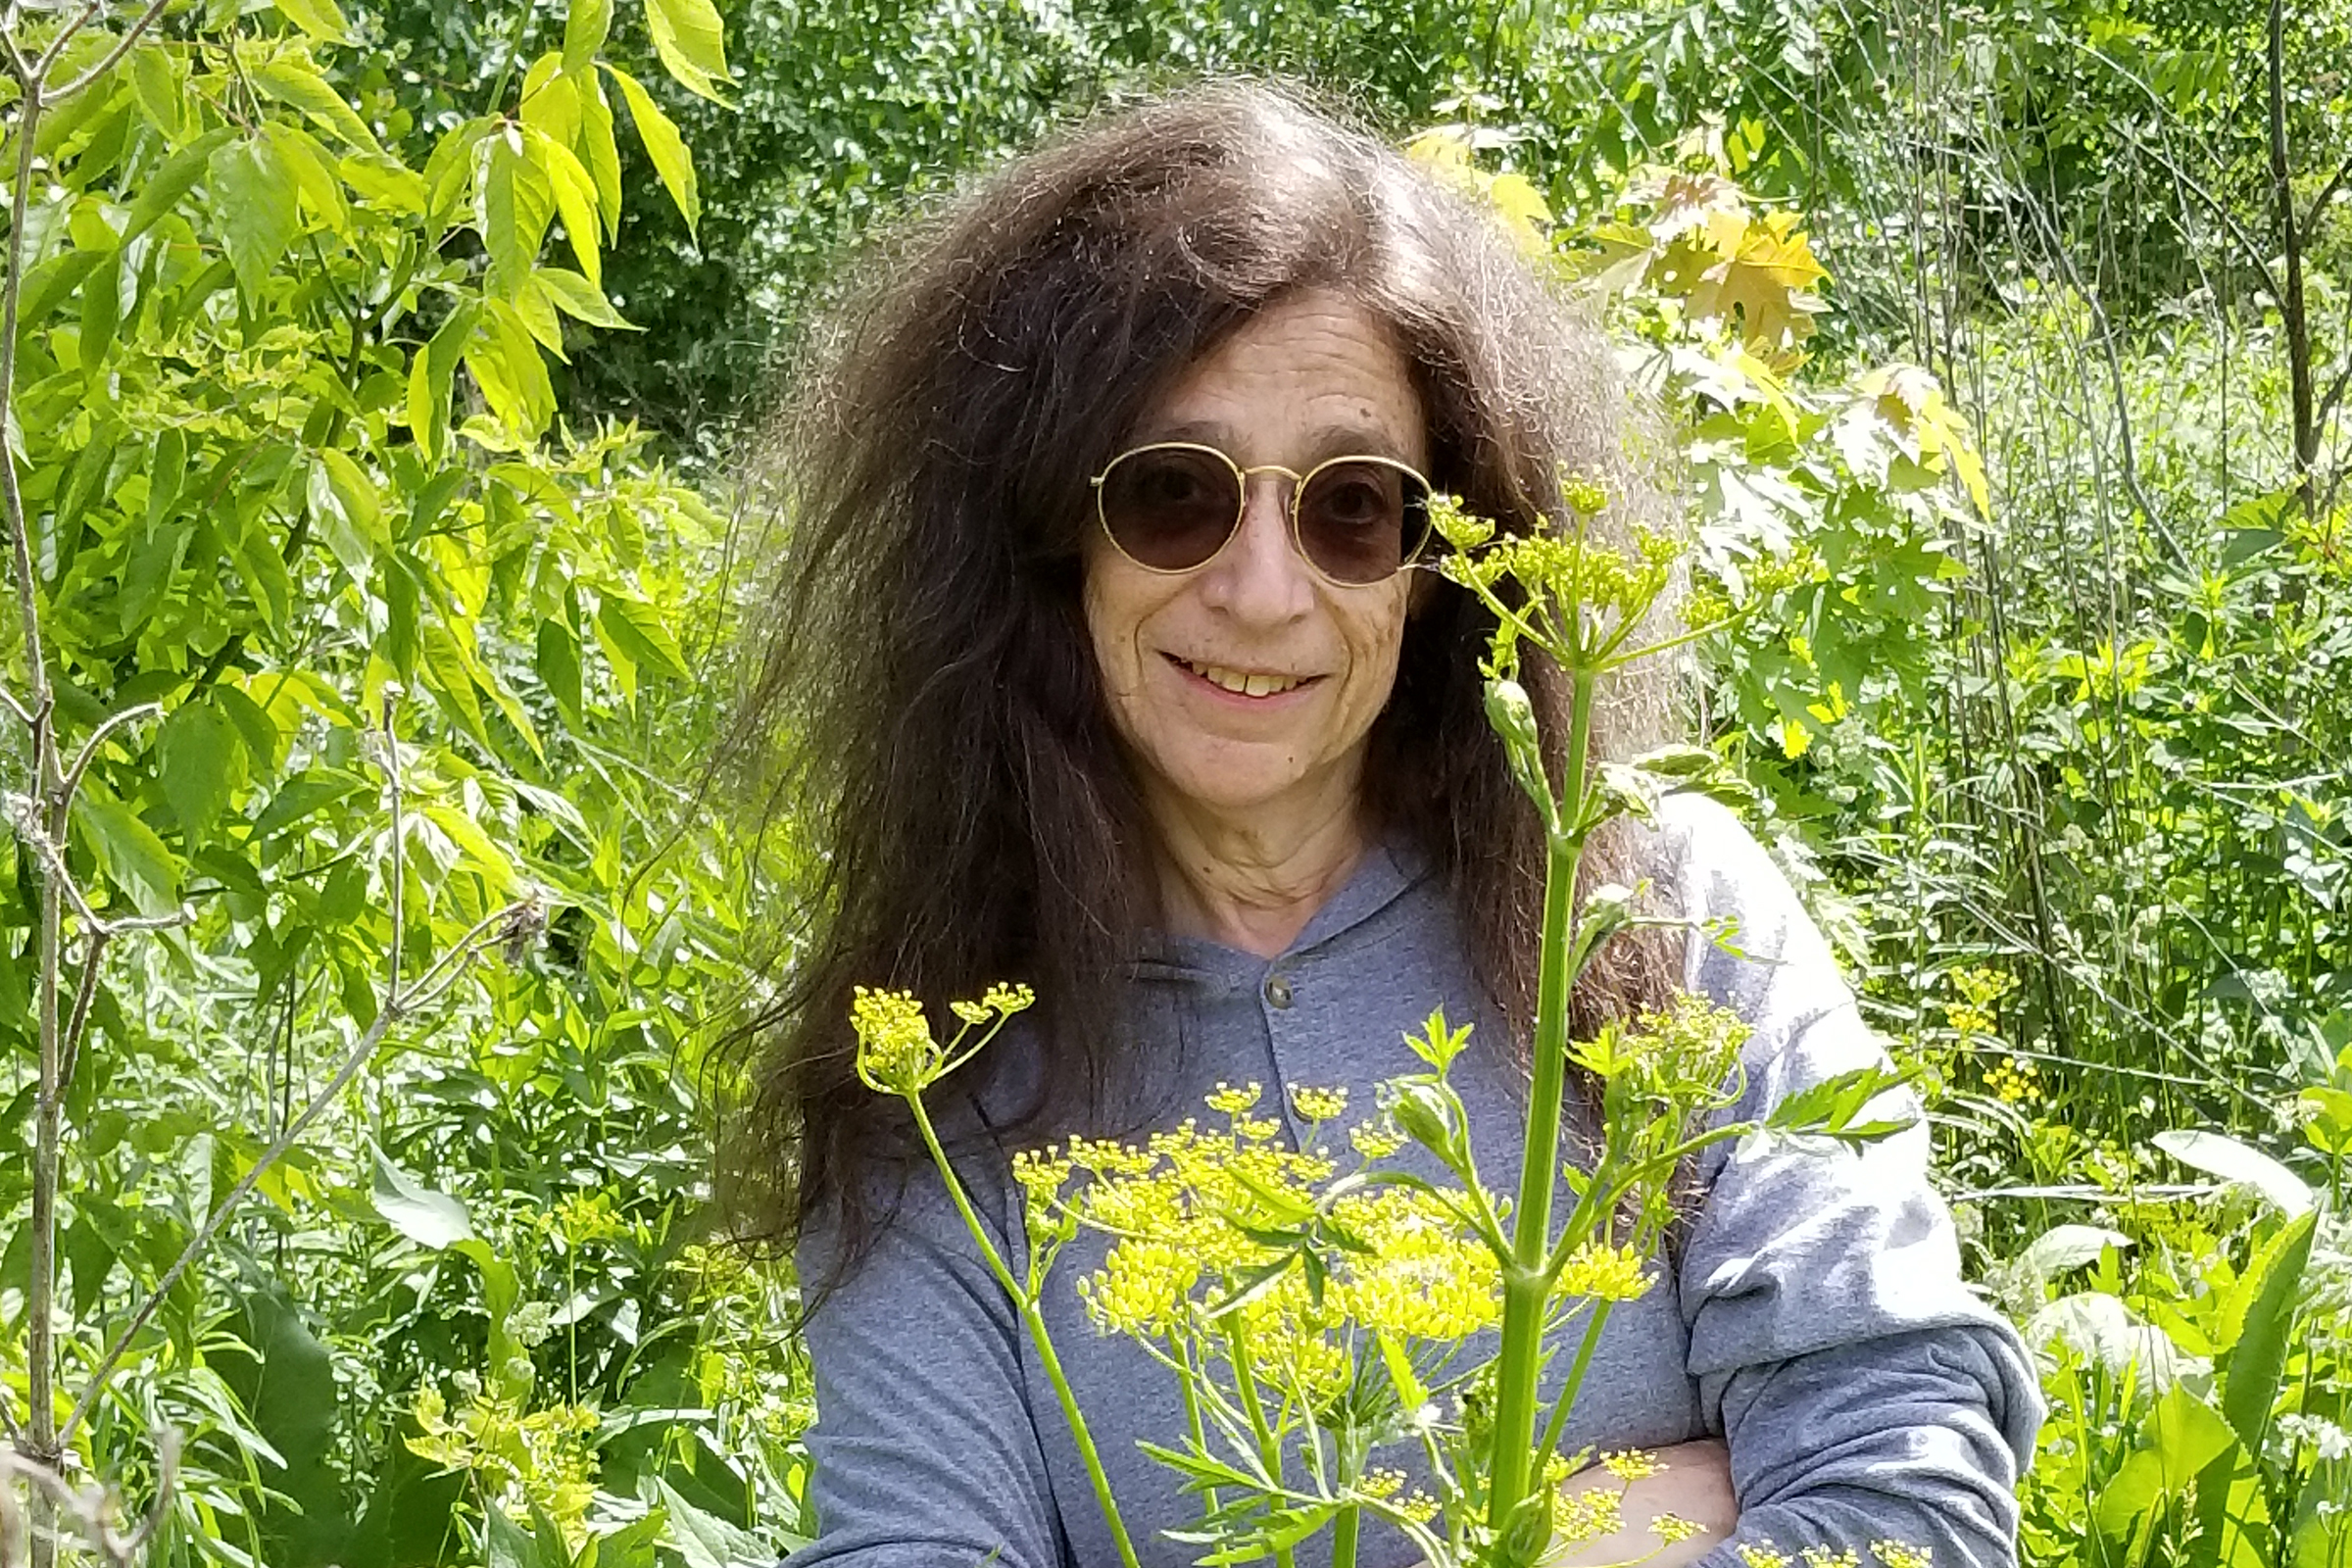 Dr. May Berenbaum in a field of parsnips